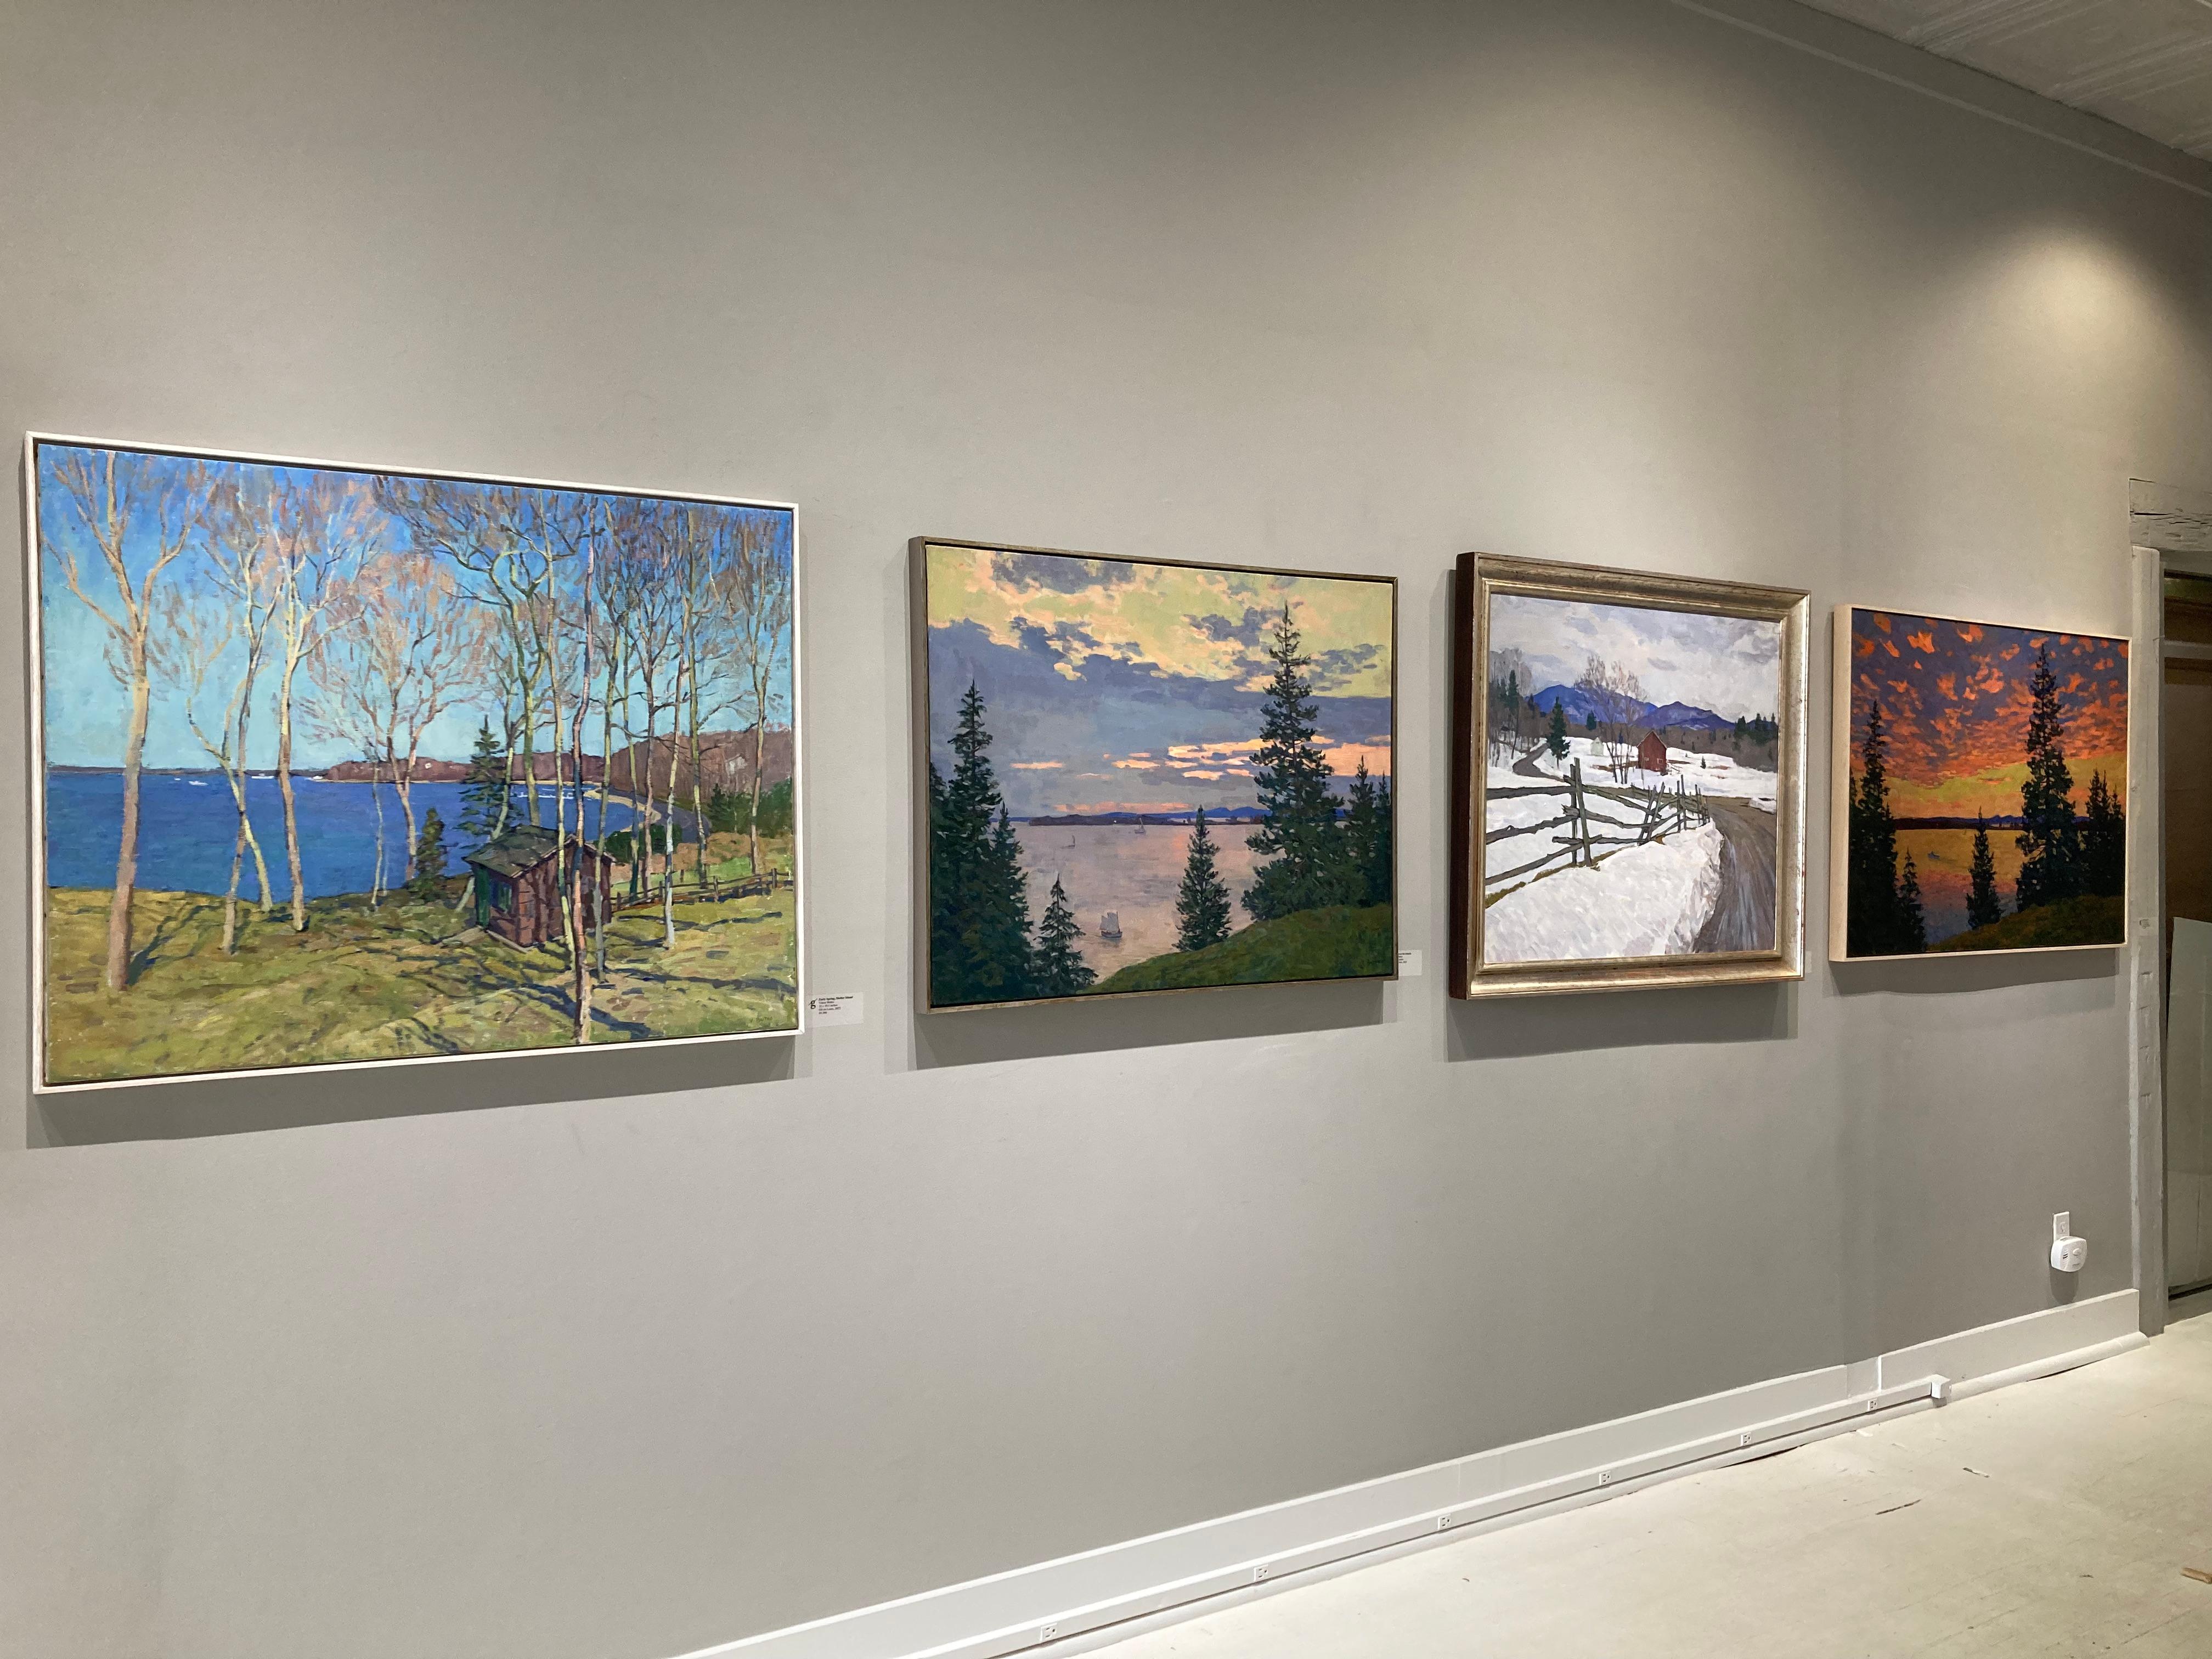 Butko paints the natural, sprawling light of early, mid, and late day. In this composition–his largest of 2023—Butko takes on early summer's mid-day light in Northeastern U.S. The clouds show signs of rainy spring that the June sun is trying to